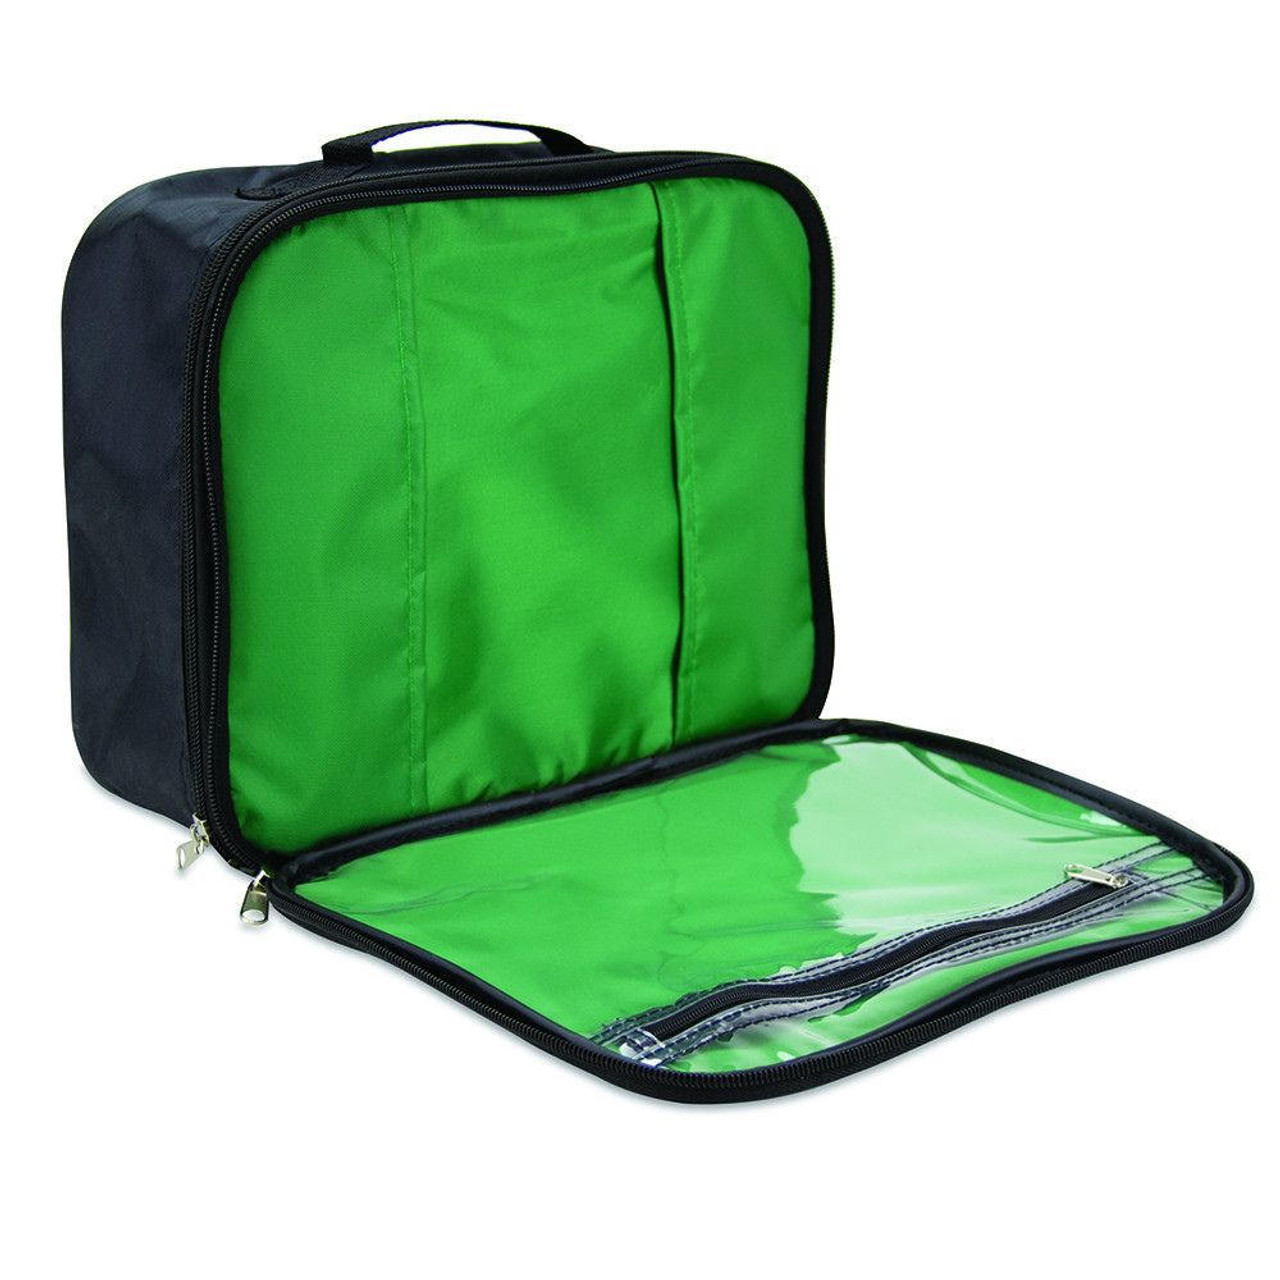 FAK5135 First Aid Grab with Fixed Internal Dividers Multiple Compartments and Shoulder Strap   